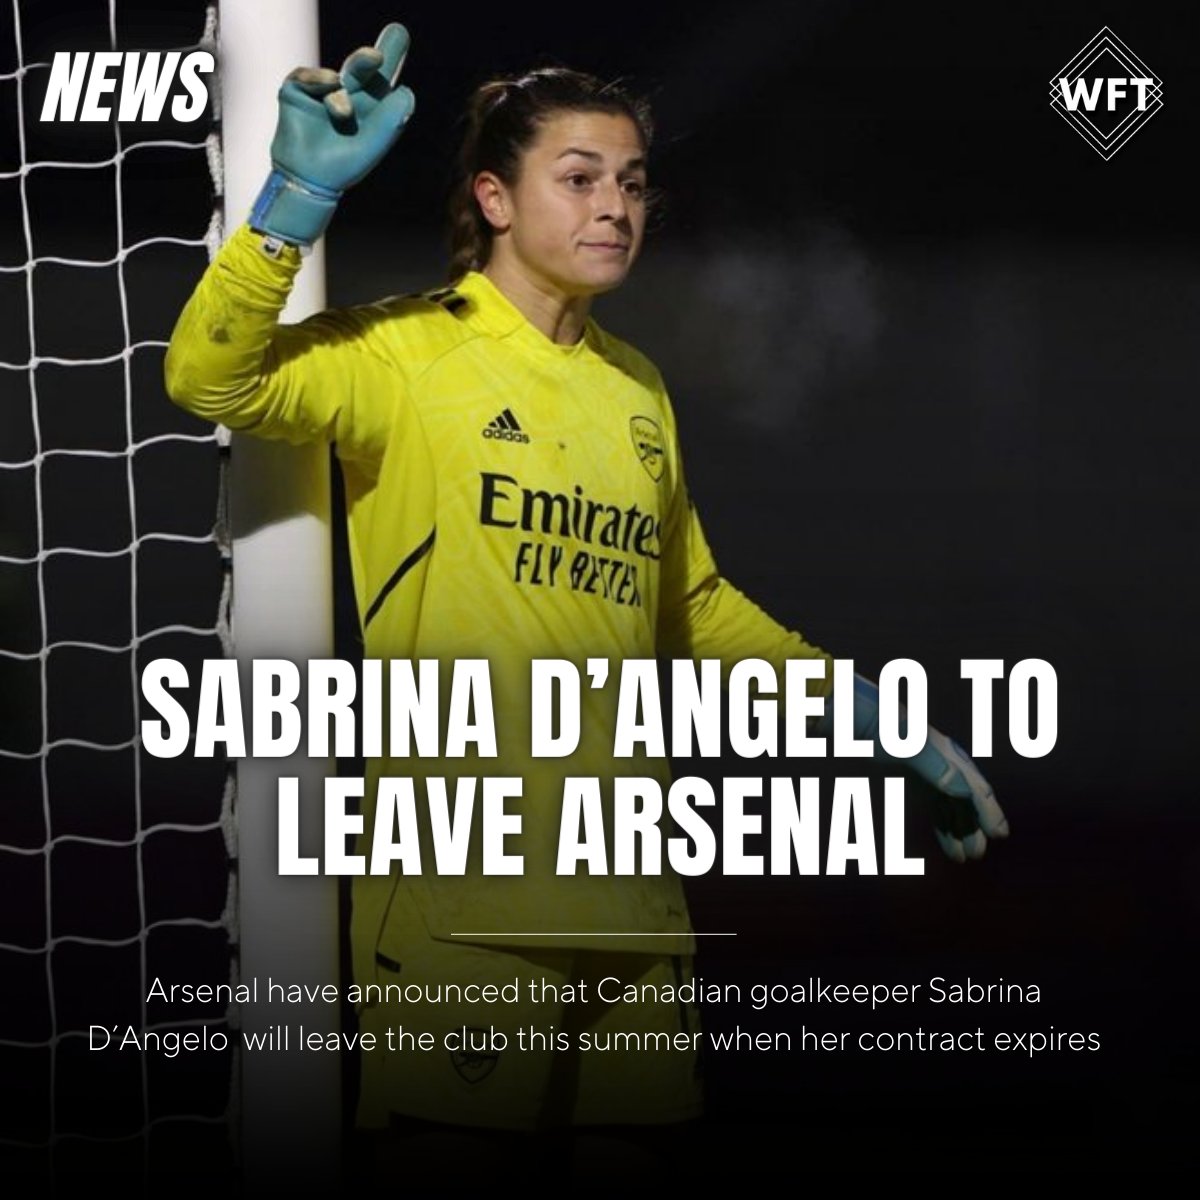 Arsenal have announced that Canadian goalkeeper Sabrina D'Angelo will leave the club this summer when her contract expires. #AWFC #BarclaysWSL